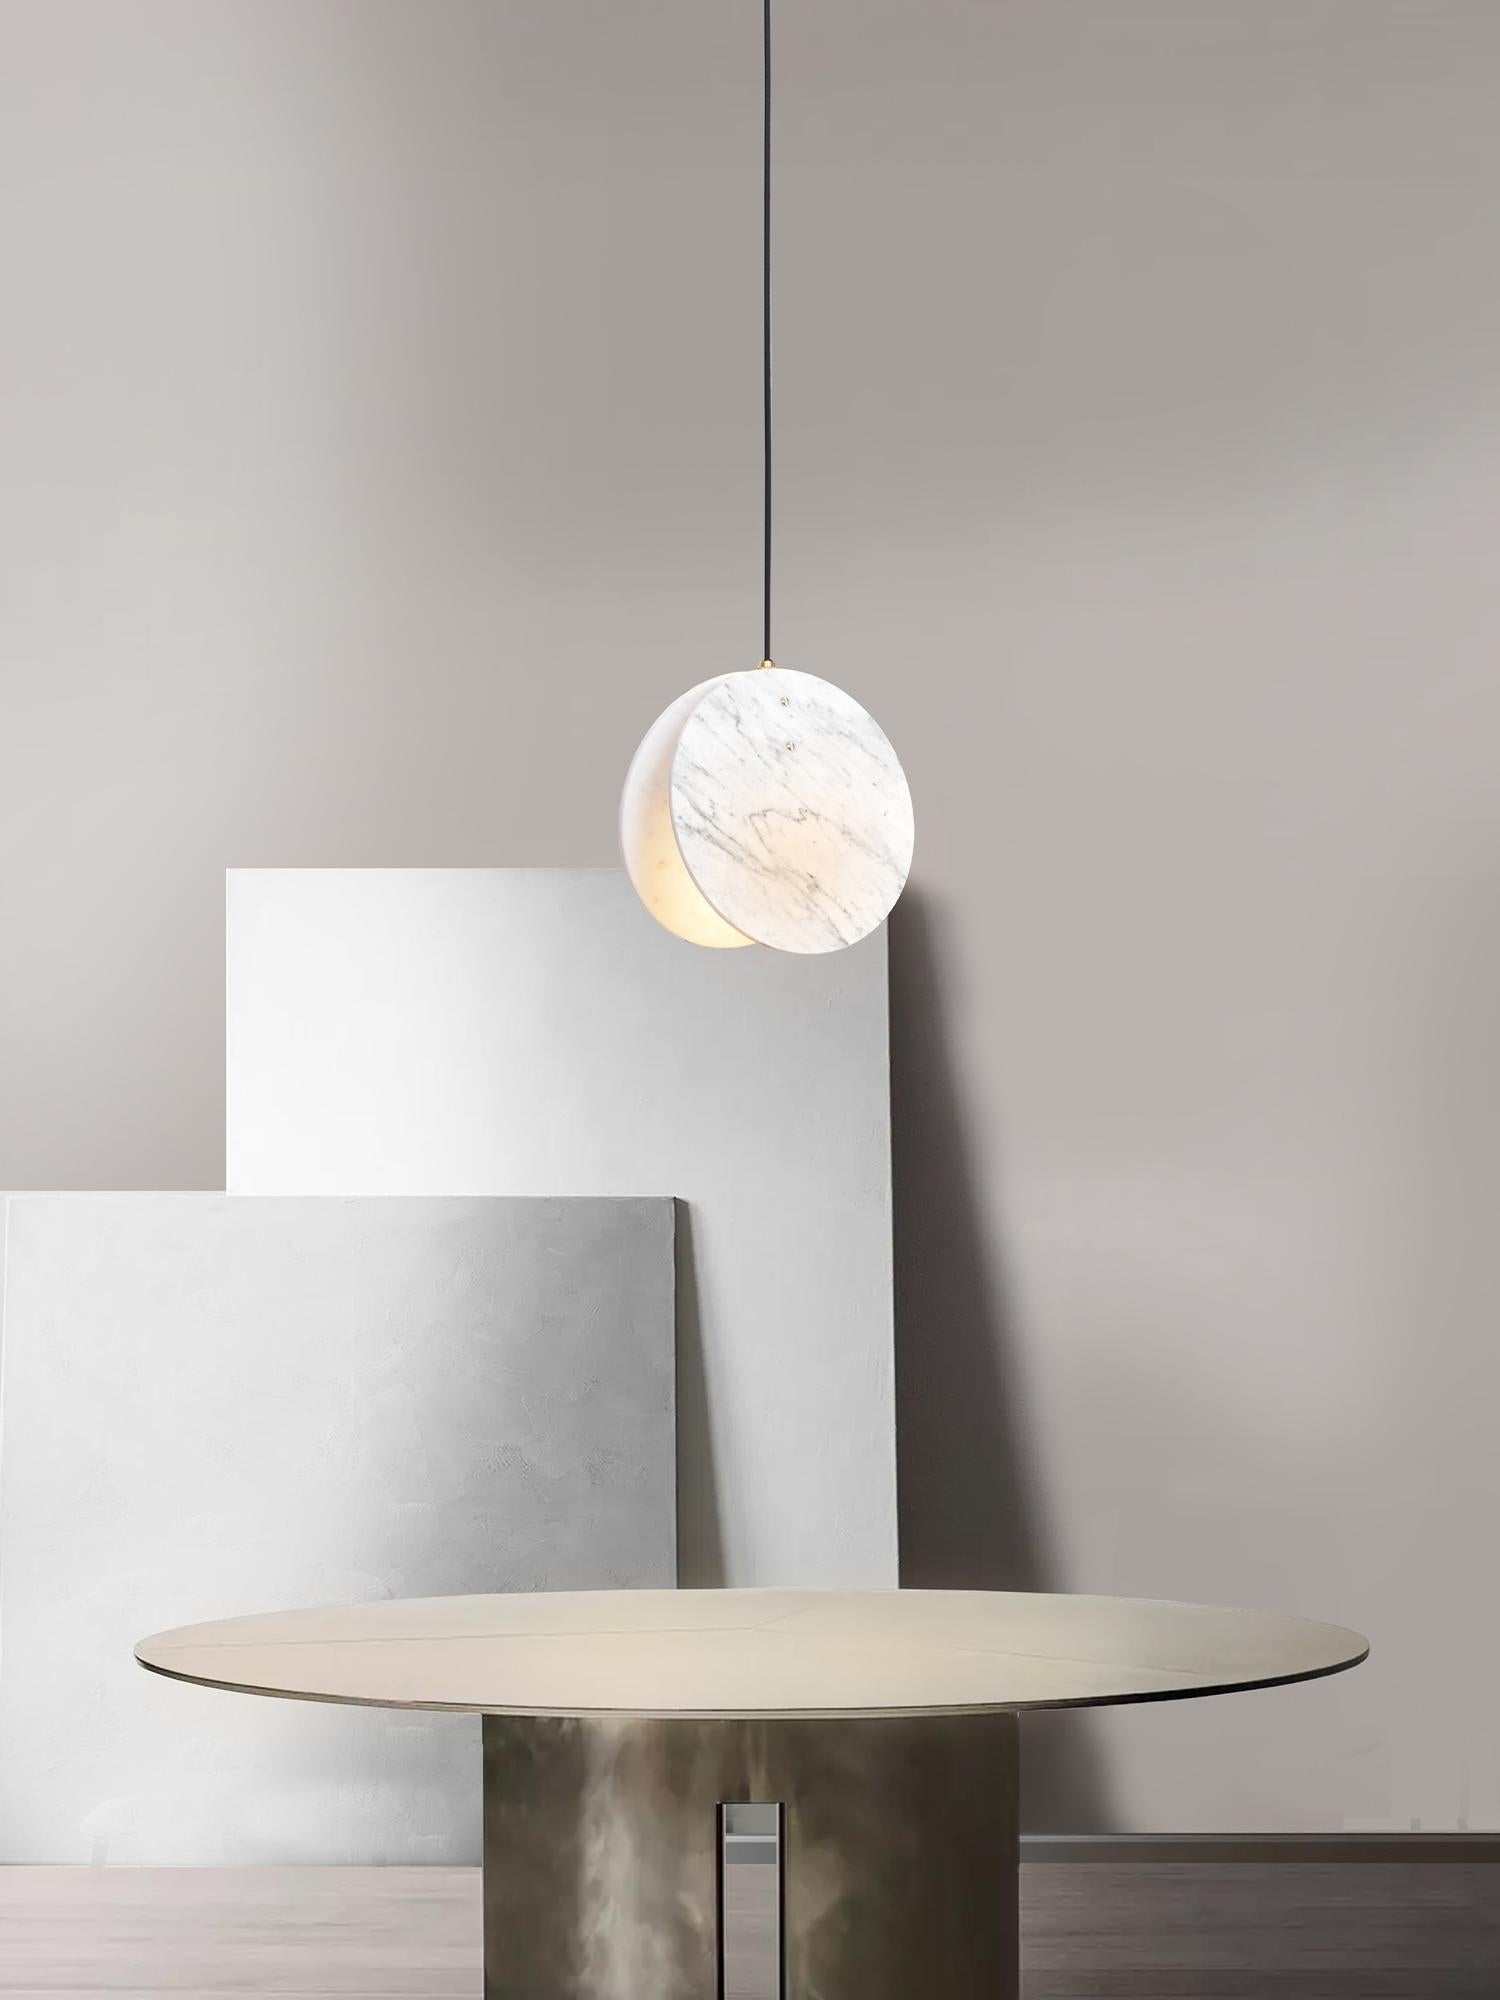 Inspired by our love for the British coastline and beaches. Made from a solid brass lamp housing, enclosed in two Carrara marble discs to create a soft, directional light source.

Lamp - GU10 (spotlight)